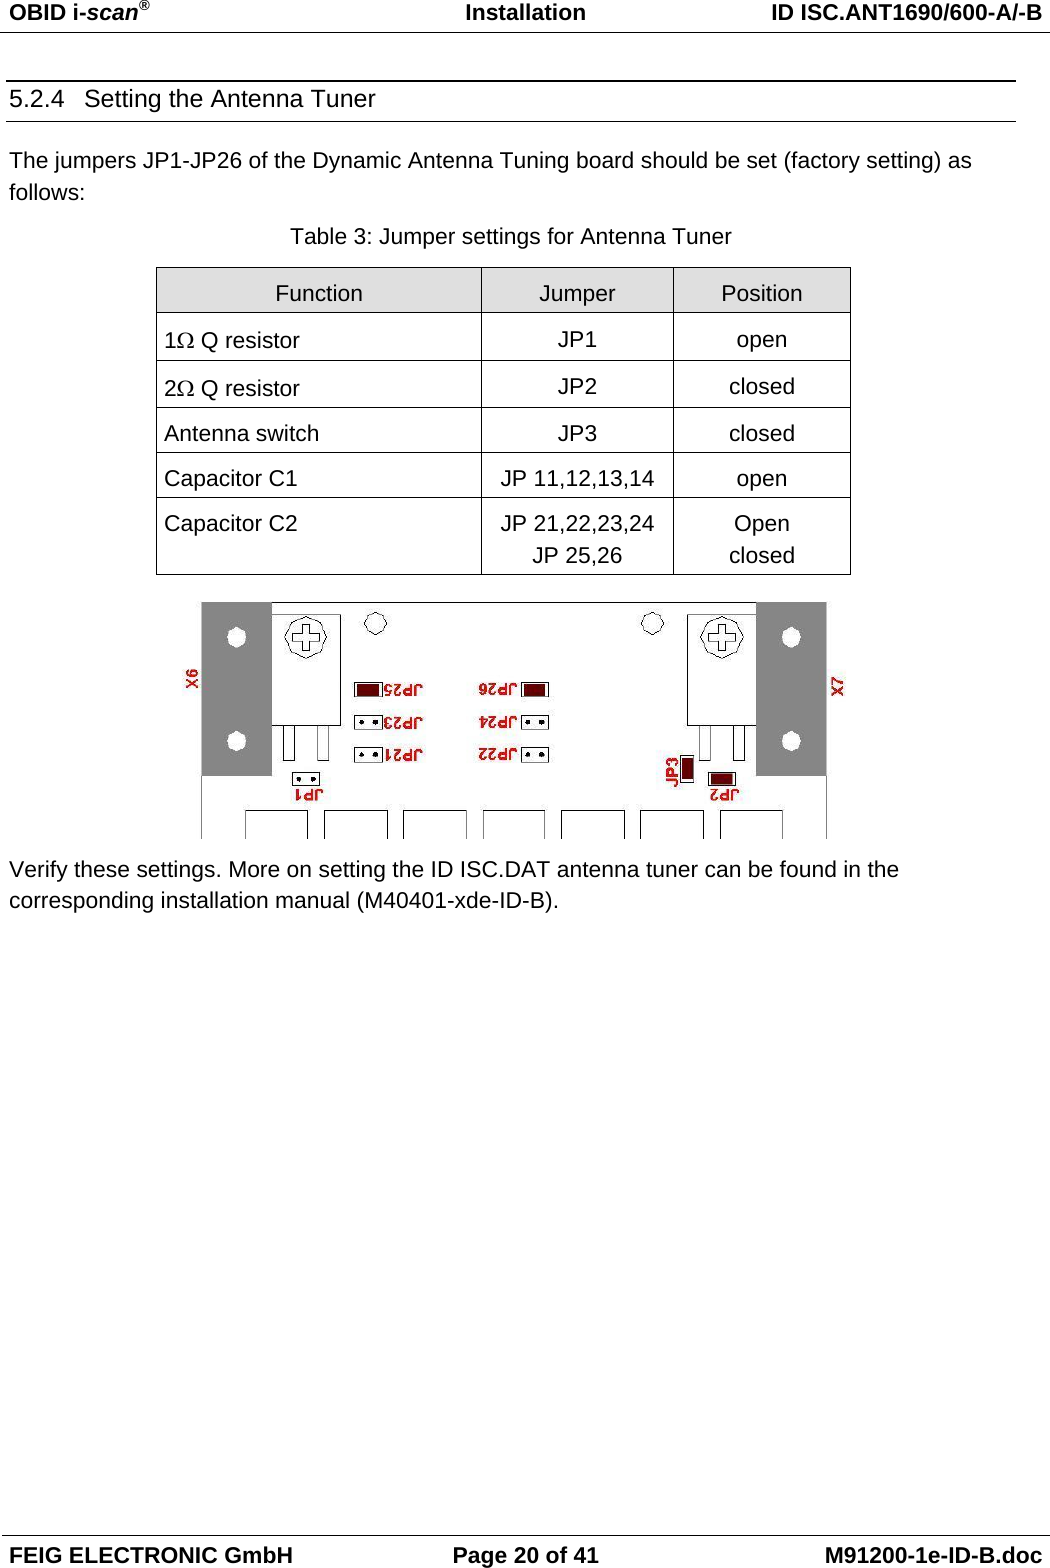 OBID i-scan®  Installation ID ISC.ANT1690/600-A/-B FEIG ELECTRONIC GmbH  Page 20 of 41  M91200-1e-ID-B.doc 5.2.4  Setting the Antenna Tuner The jumpers JP1-JP26 of the Dynamic Antenna Tuning board should be set (factory setting) as follows: Table 3: Jumper settings for Antenna Tuner Function  Jumper  Position 1Ω Q resistor  JP1 open 2Ω Q resistor  JP2 closed Antenna switch  JP3  closed Capacitor C1  JP 11,12,13,14  open Capacitor C2  JP 21,22,23,24JP 25,26 Open closed  Verify these settings. More on setting the ID ISC.DAT antenna tuner can be found in the corresponding installation manual (M40401-xde-ID-B). 